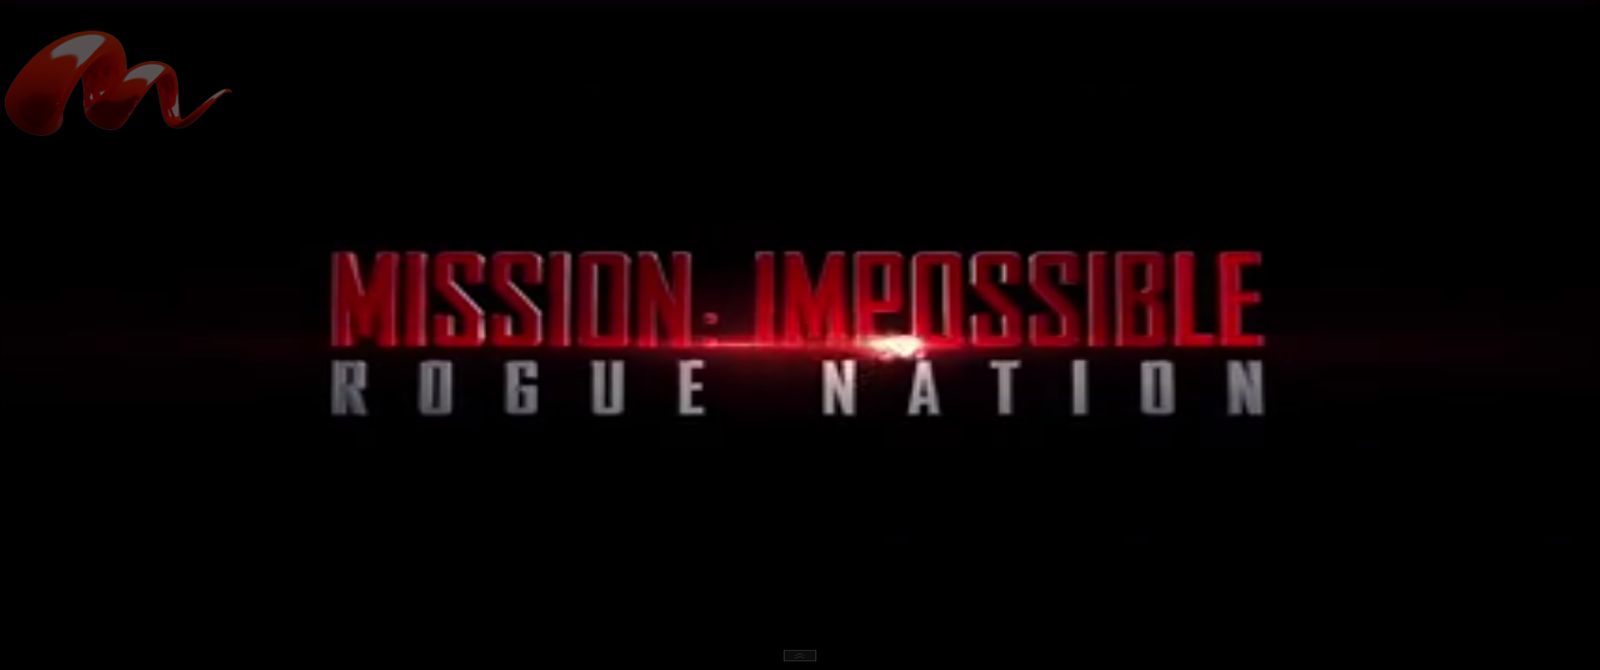 Download Mission: Impossible 5 - Rogue Nation Full Movie Free HD